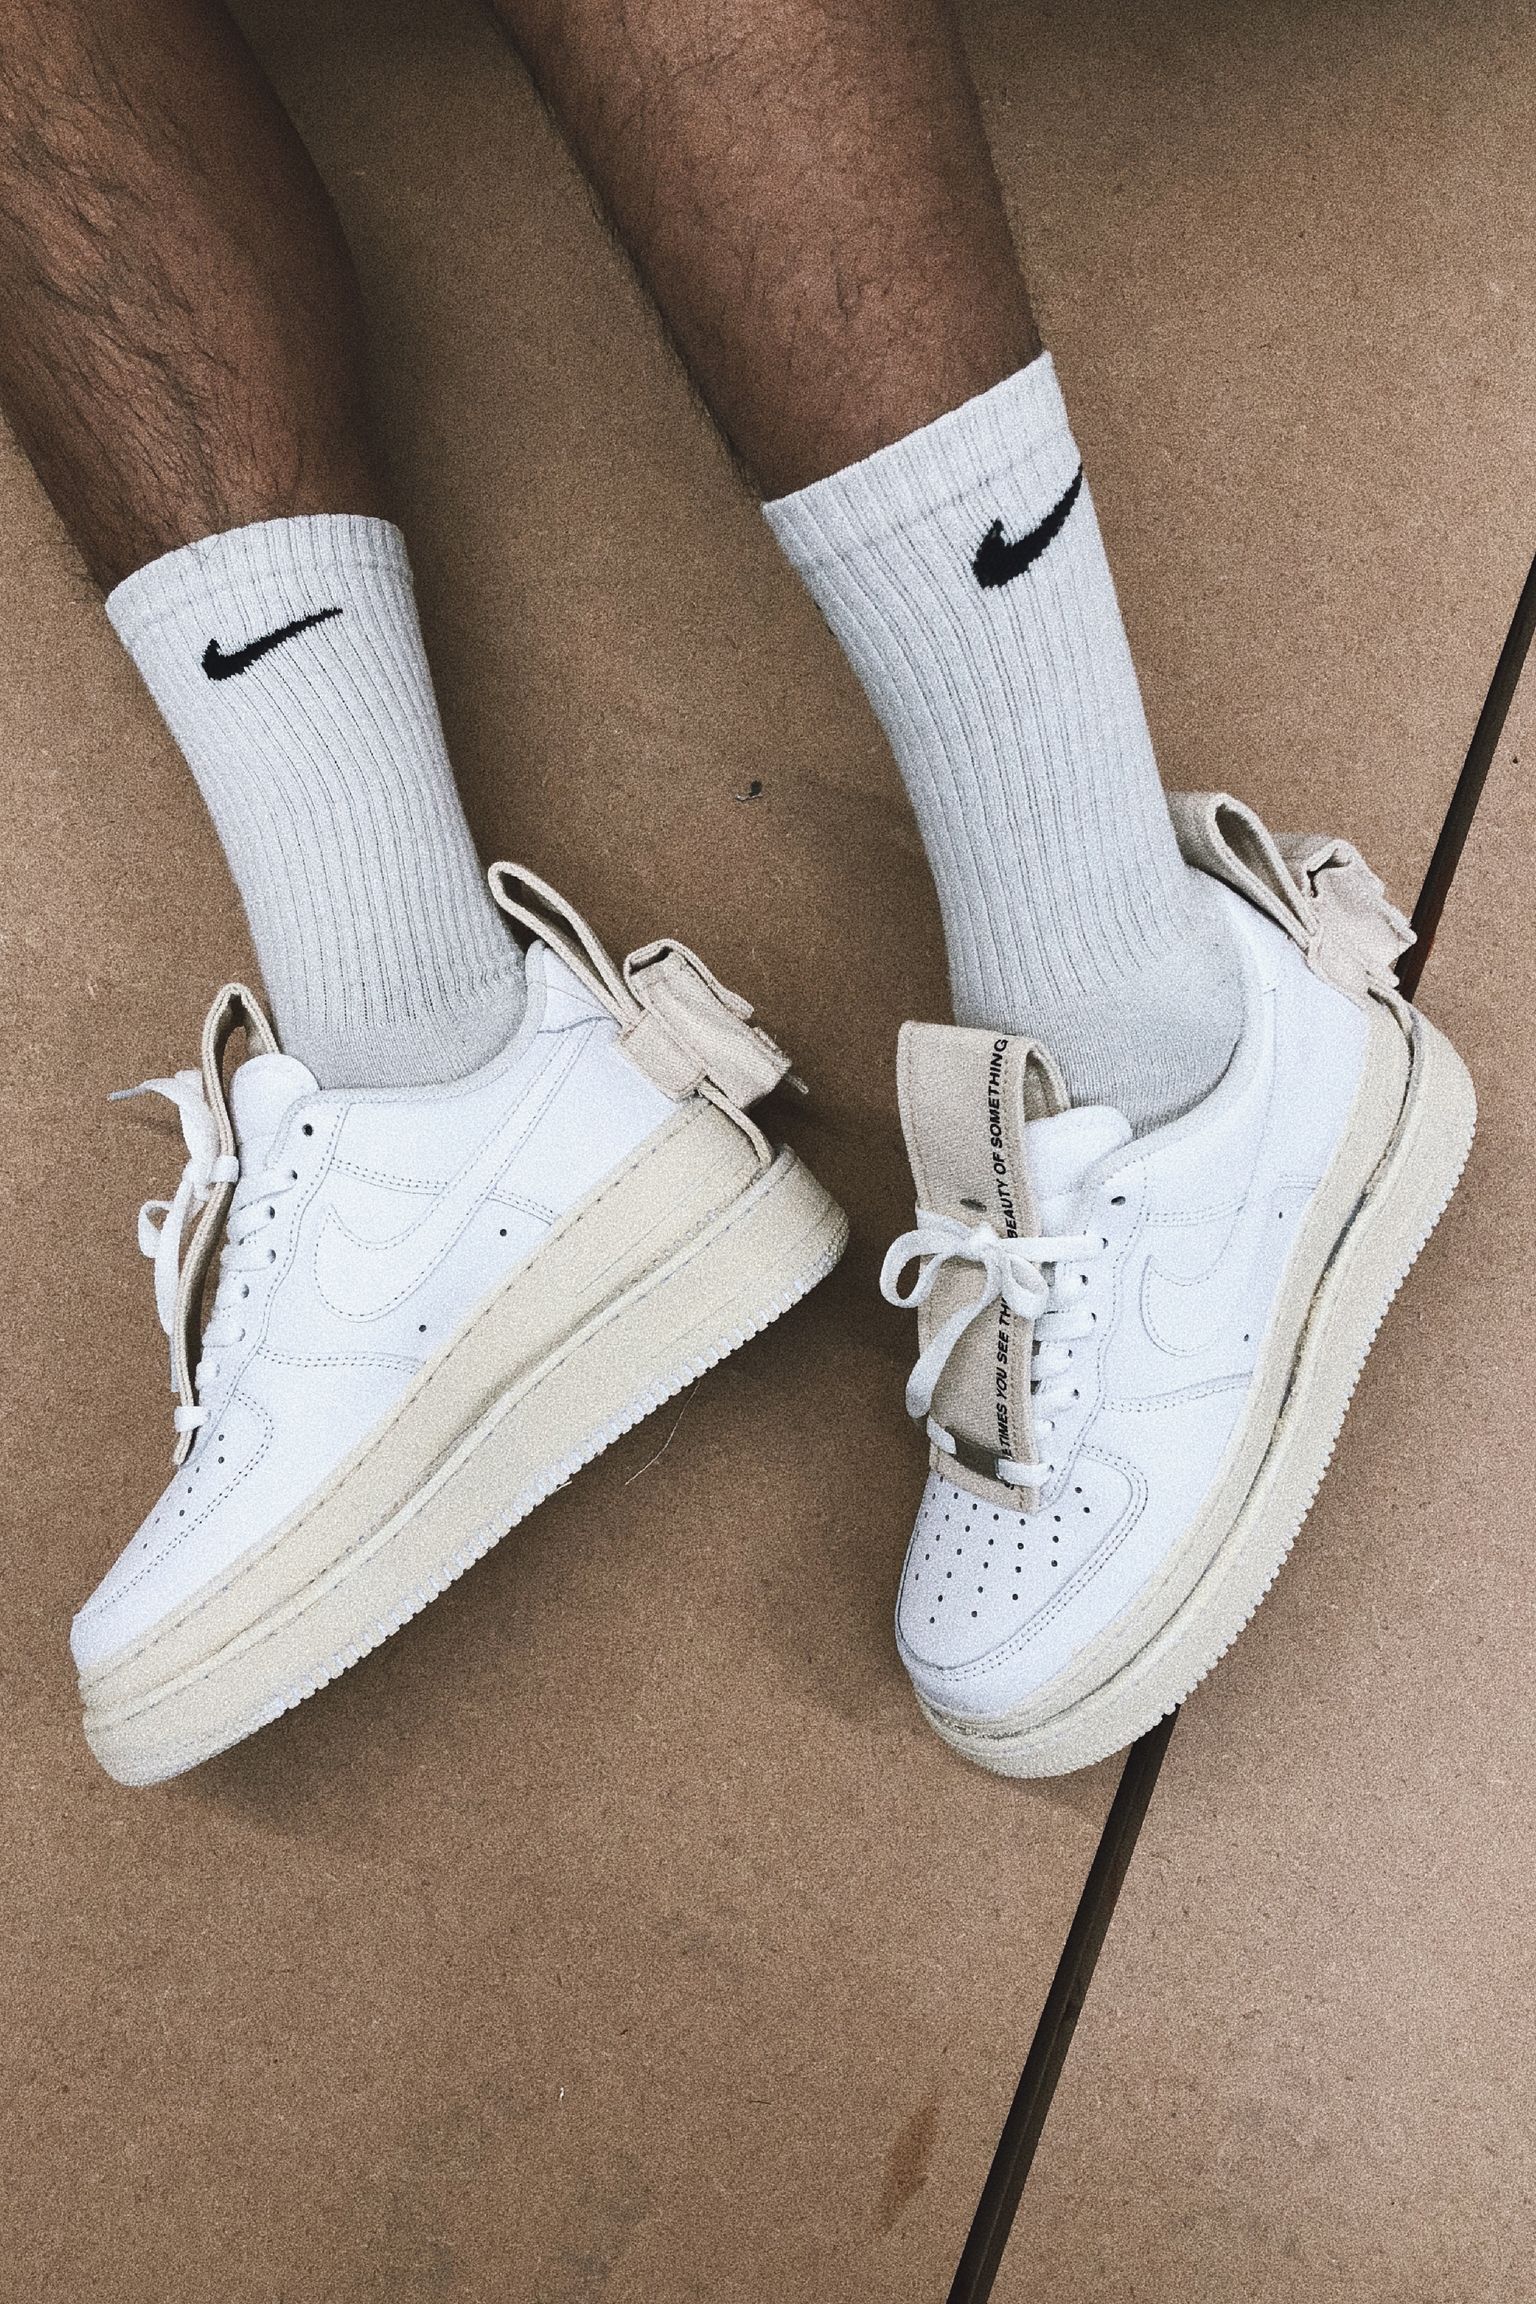 Val Kristopher X Air Force 1 Utility 